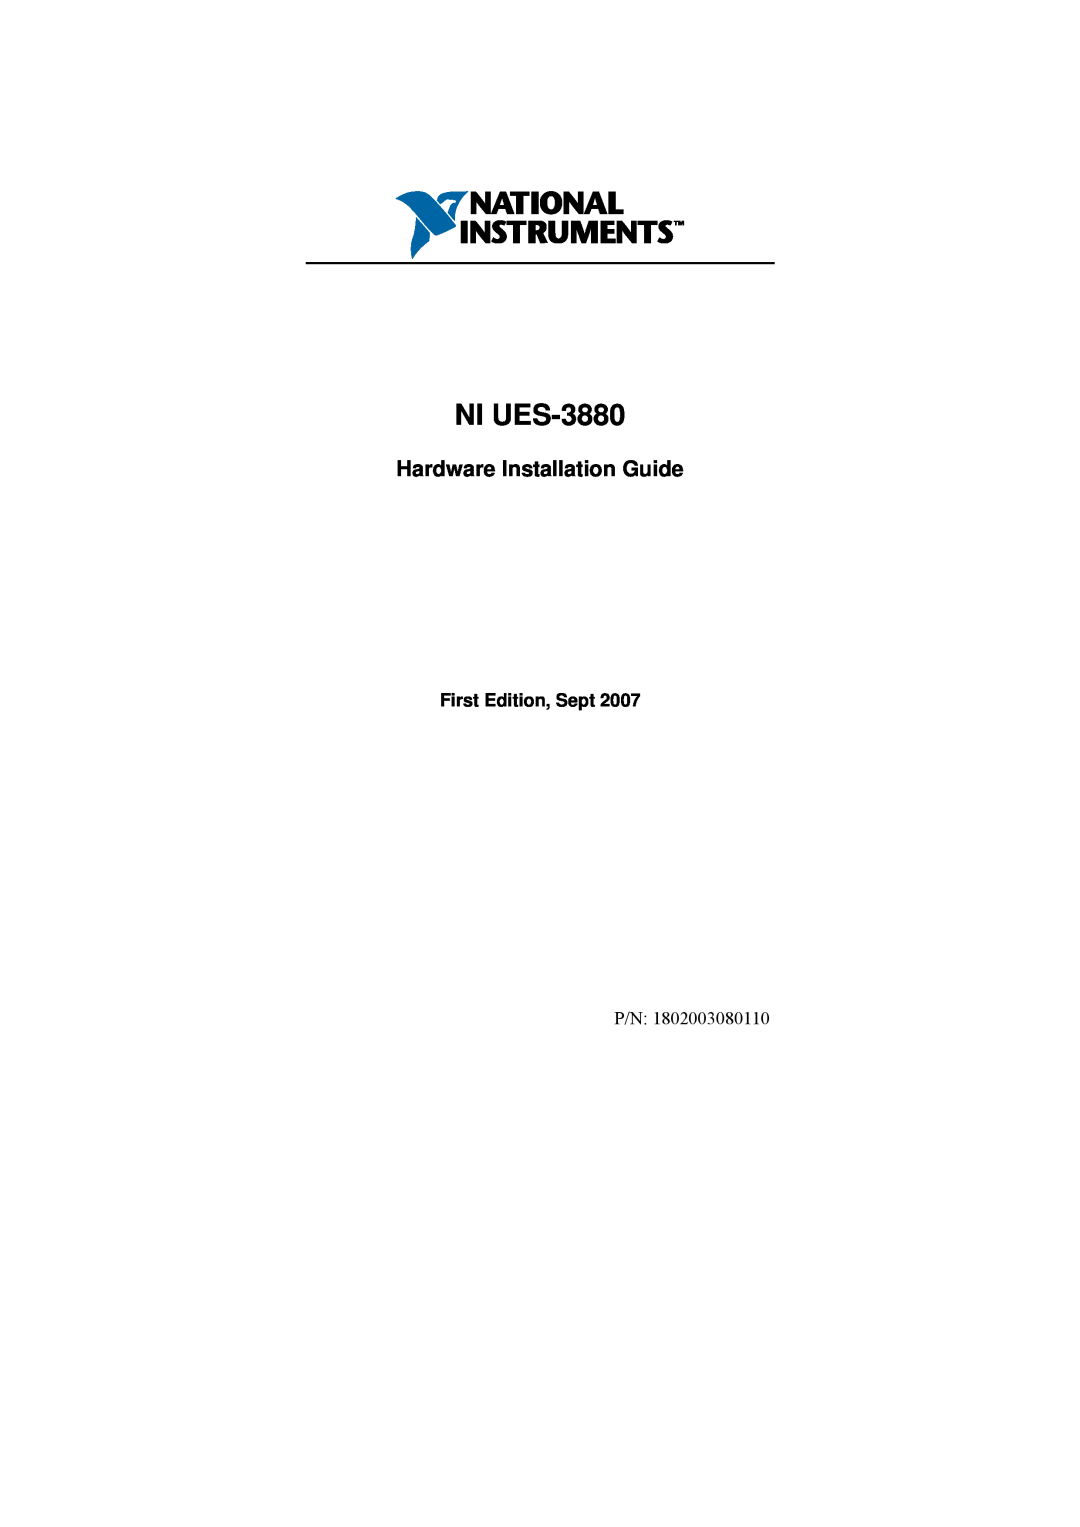 National Instruments NI UES-3880 manual Hardware Installation Guide, First Edition, Sept 